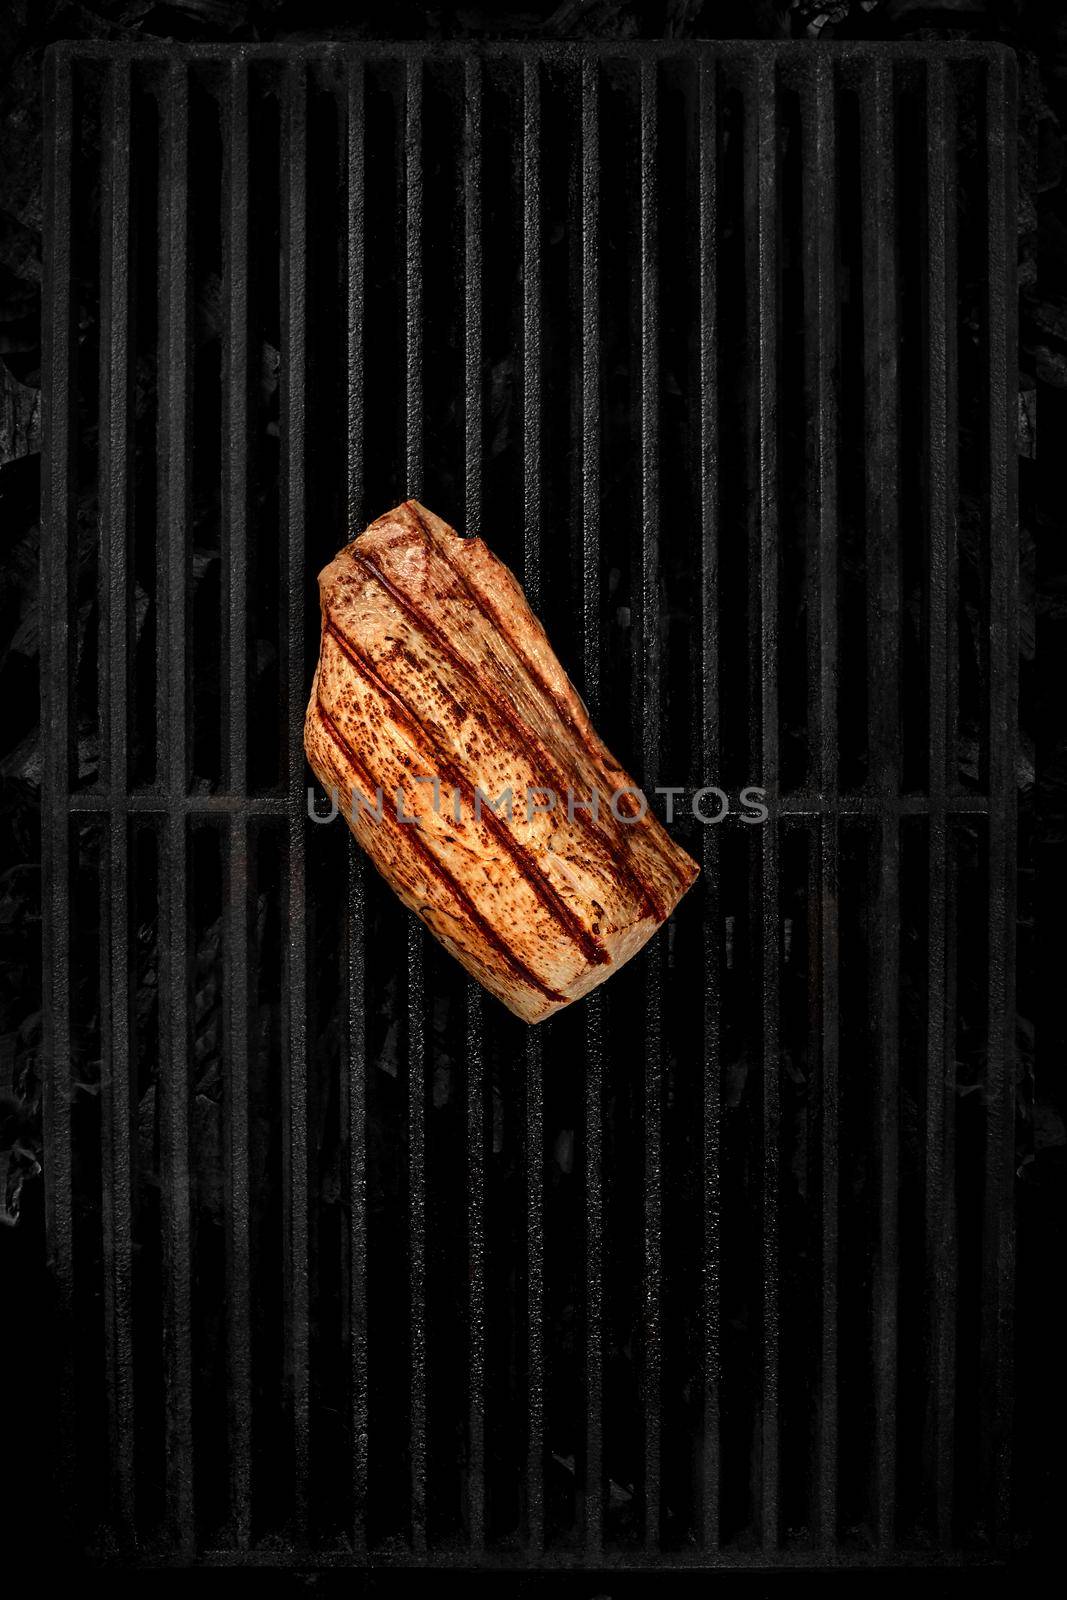 Top view of grilled veal tenderloin lying on black cast iron grill grate over cold coals. BBQ cooking concept. Vertical image